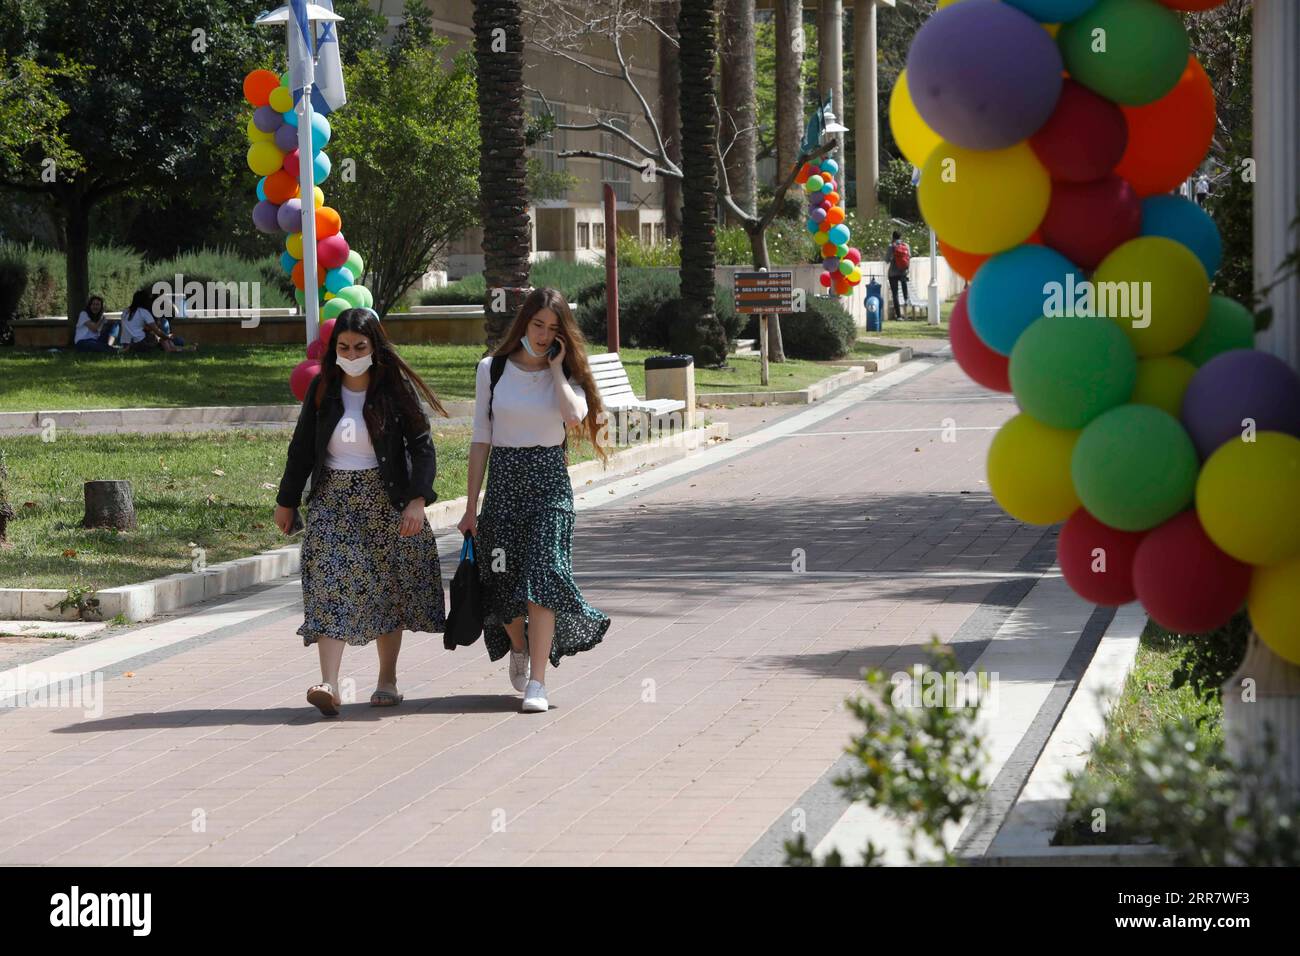 210405 -- RAMAT GAN, April 5, 2021 -- Students walk in the campus at Bar Ilan University at central Israeli city of Ramat Gan on April 5, 2021. Israel s Ministry of Health reported 353 new COVID-19 cases on Monday, raising the total infections in the country to 834,563. The number of patients in serious conditions decreased from 344 to 323, out of the 489 hospitalized patients. This is the lowest number of patients in serious conditions in Israel since Dec. 10, 2020 when it stood at 320. Photo by /Xinhua ISRAEL-RAMAT GAN-COVID-19-CASES GilxCohenxMagen PUBLICATIONxNOTxINxCHN Stock Photo